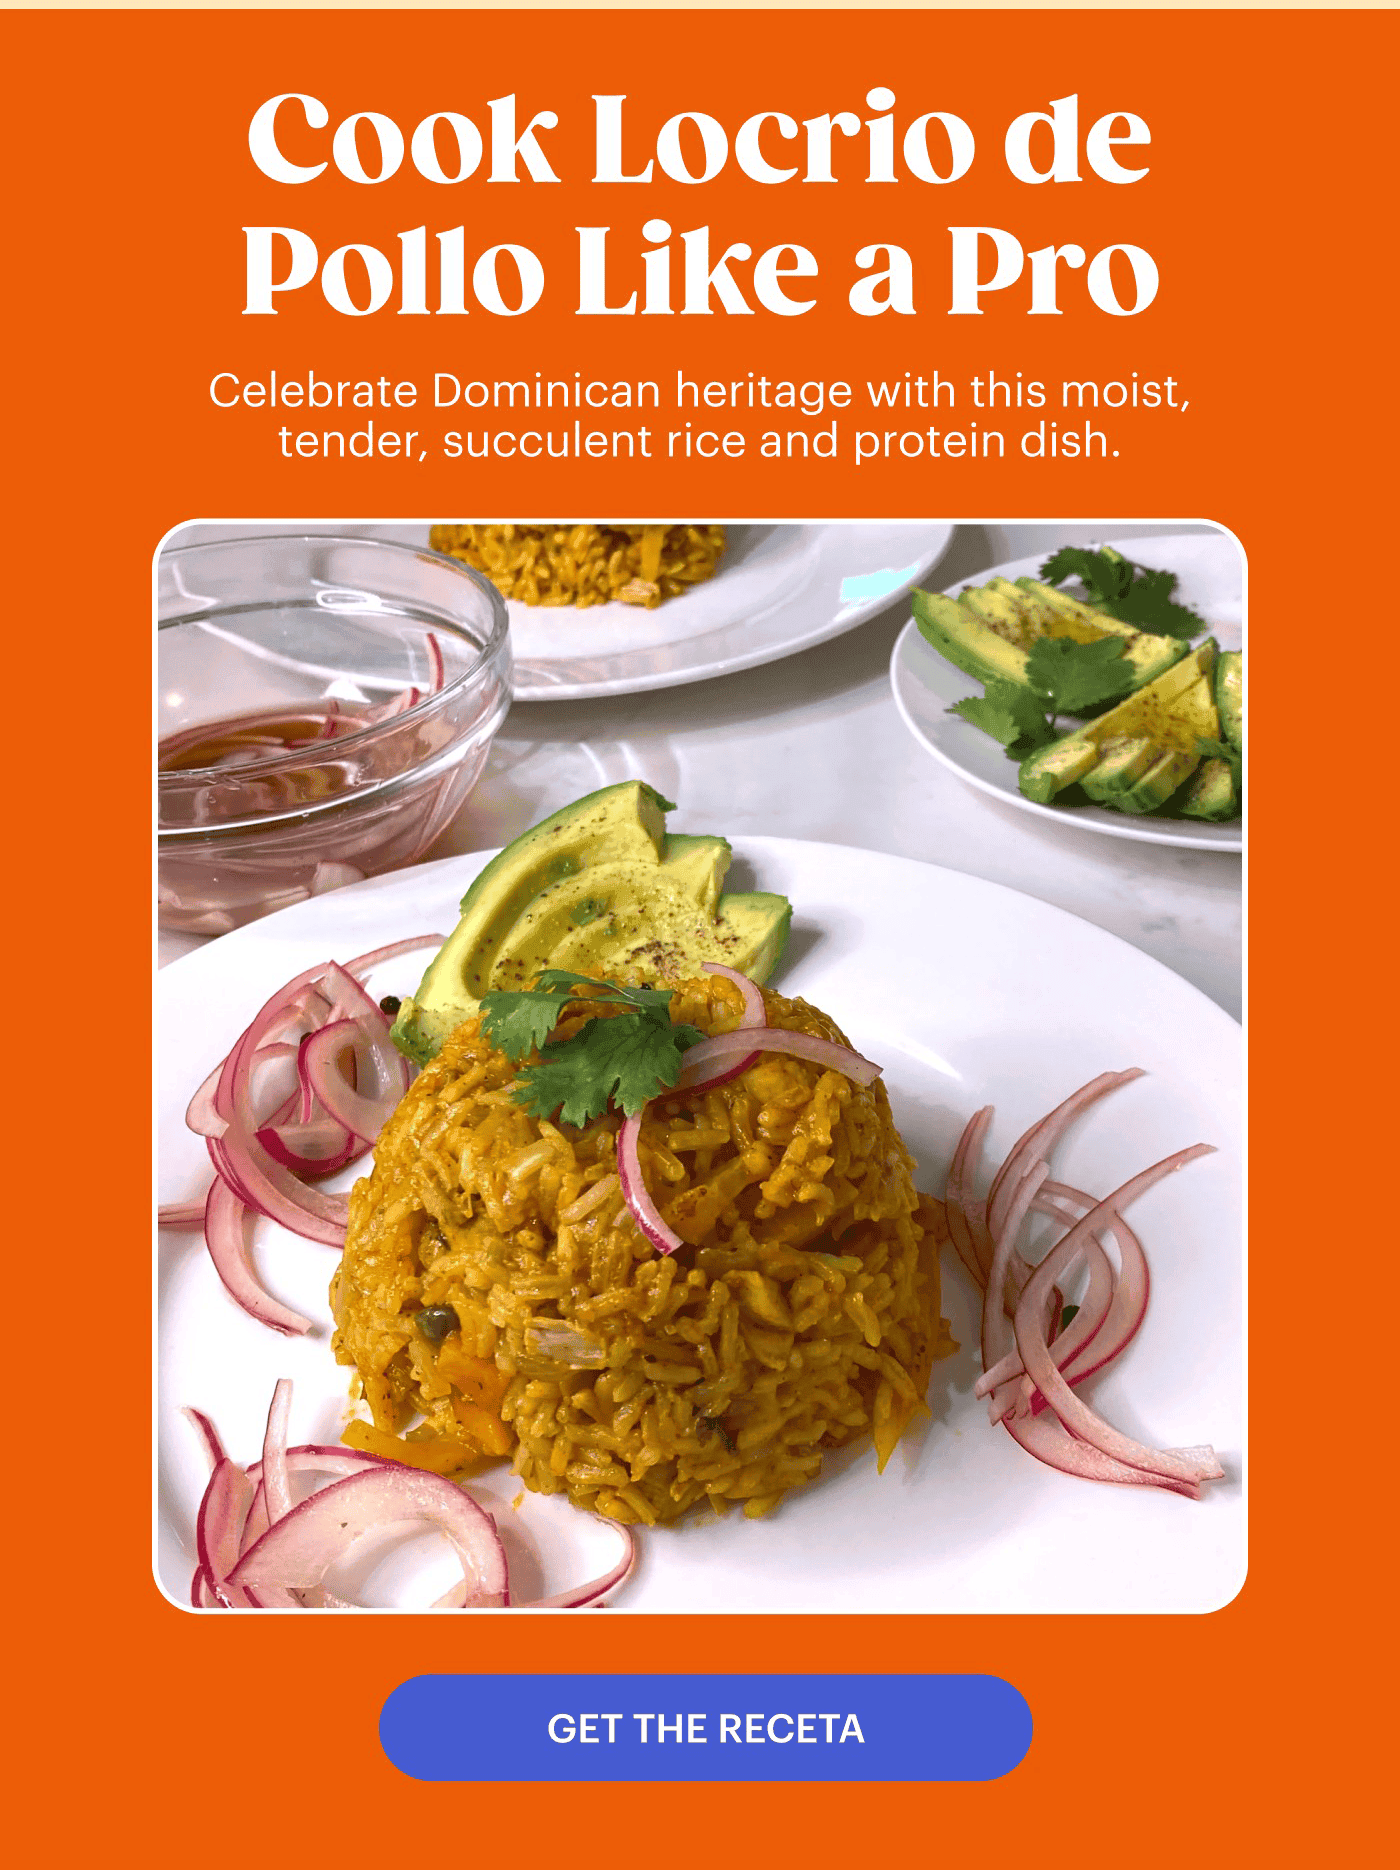 Cook Locrio de Pollo Like a Pro Celebrate Dominican heritage with this moist, tender, succulent rice and protein dish. Get the Receta.